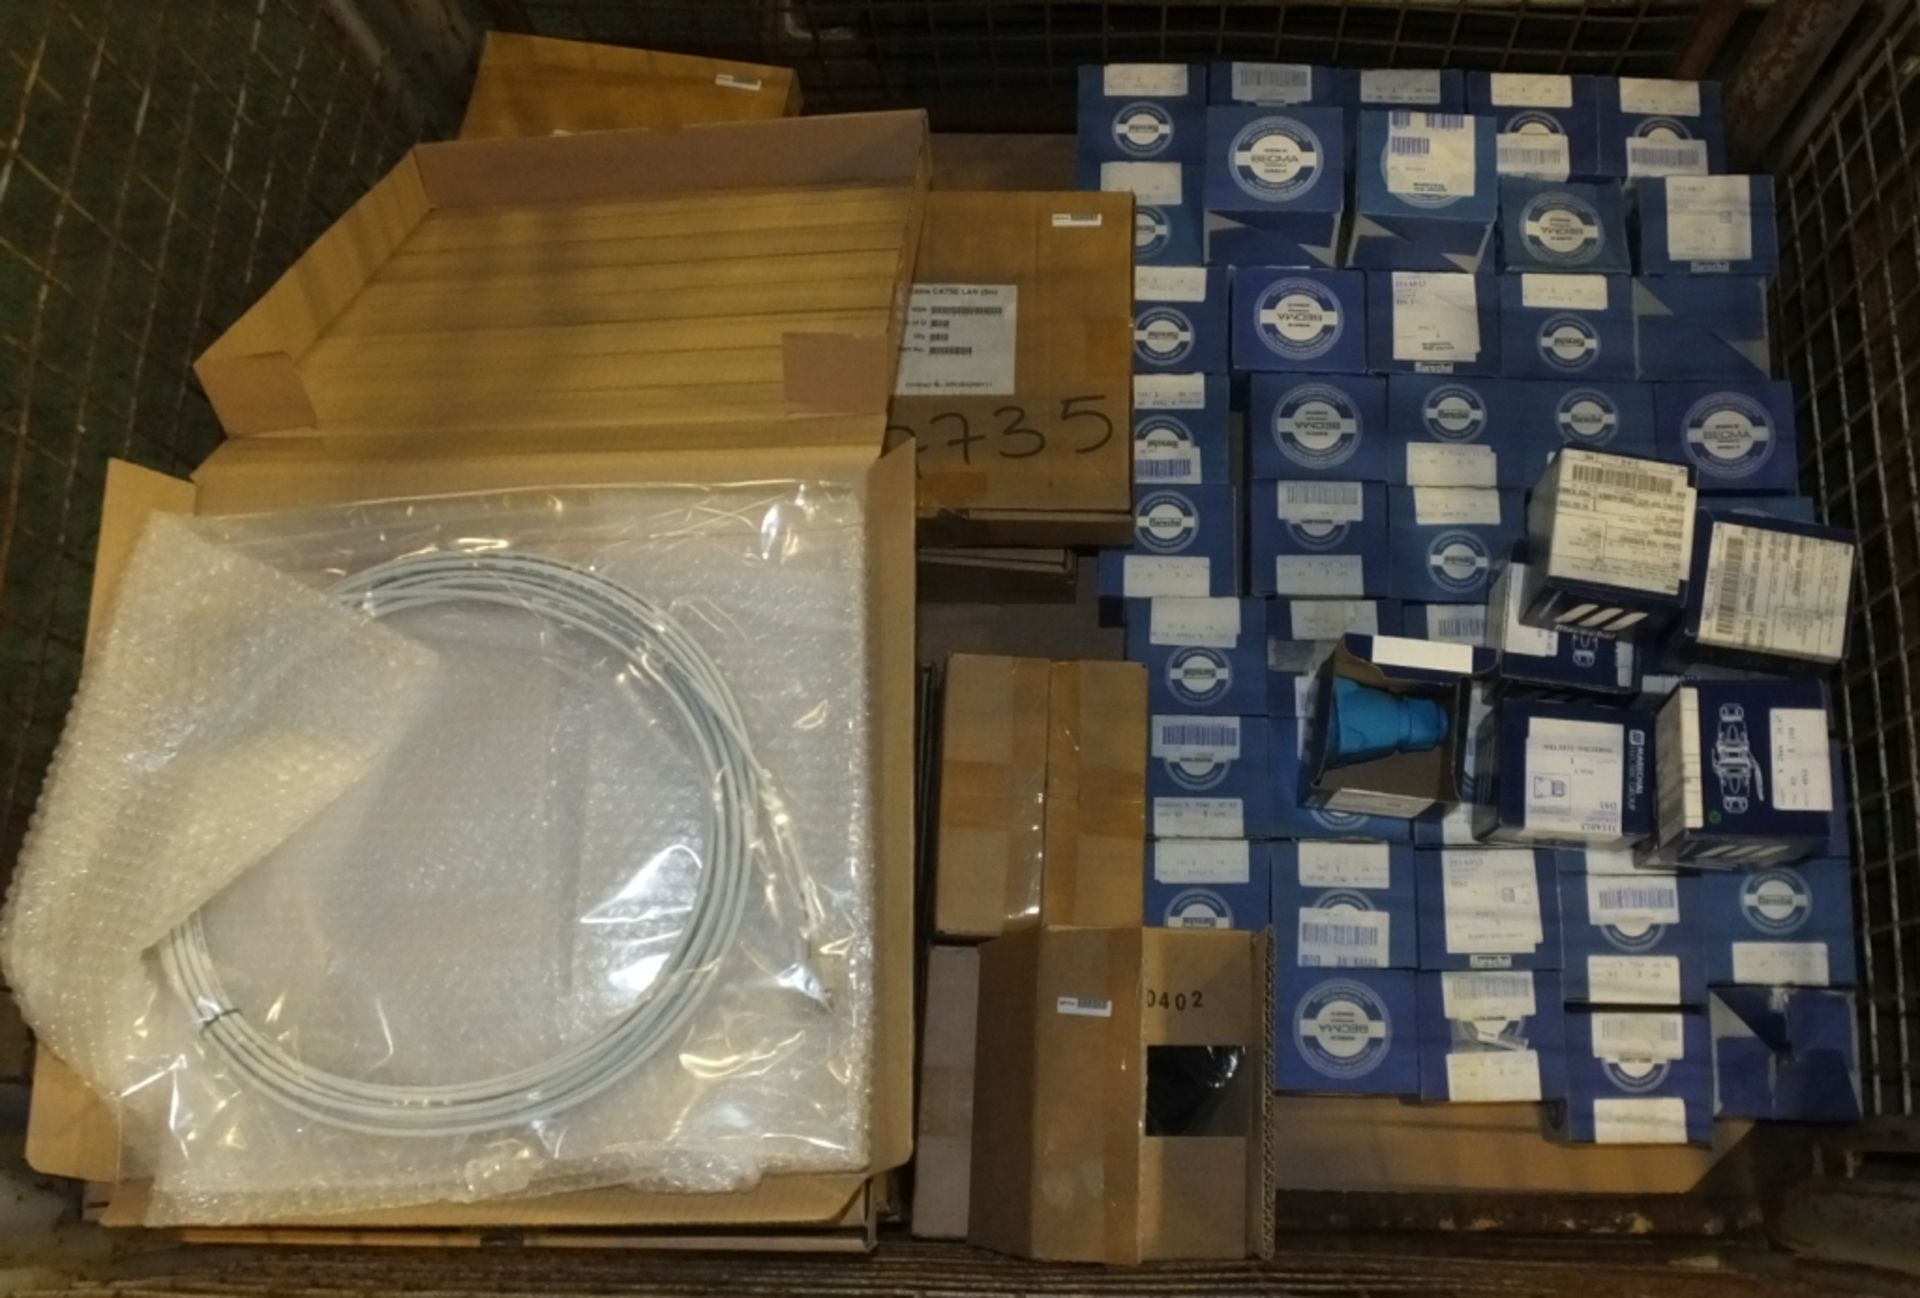 55x Light holders, 10x Cable Cat5E Lan (10m), 3x Cable Cat6 Patch (1m), 4x Cable Cat5E Lan